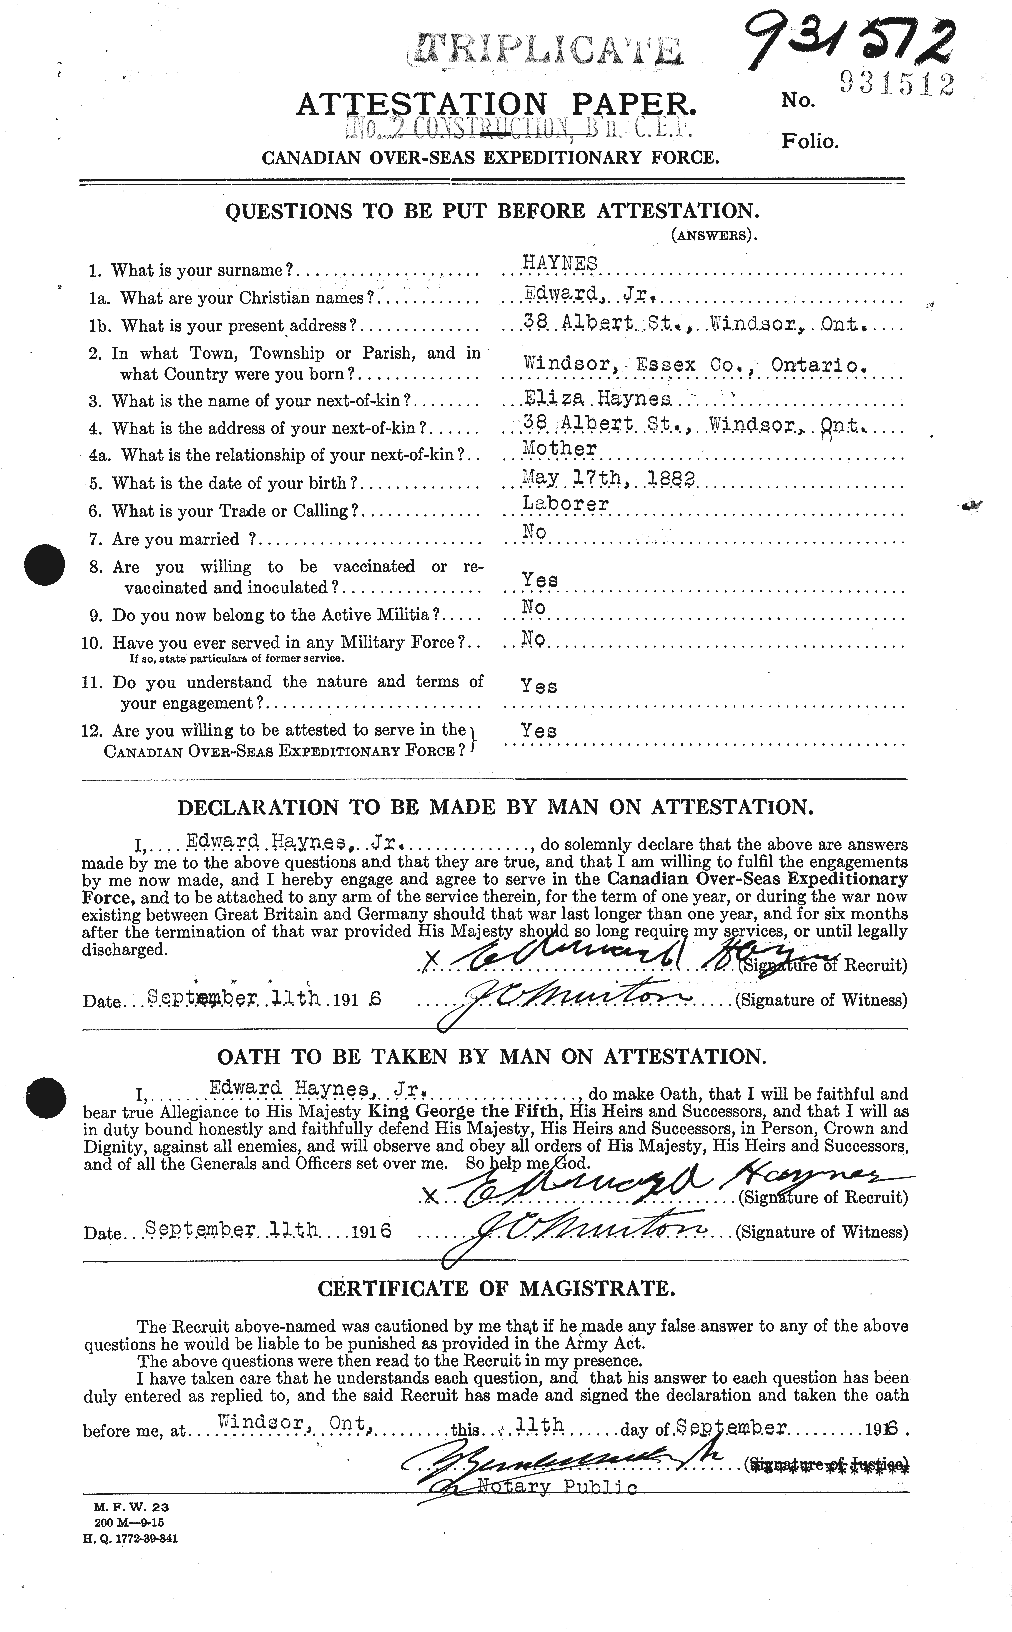 Personnel Records of the First World War - CEF 384340a